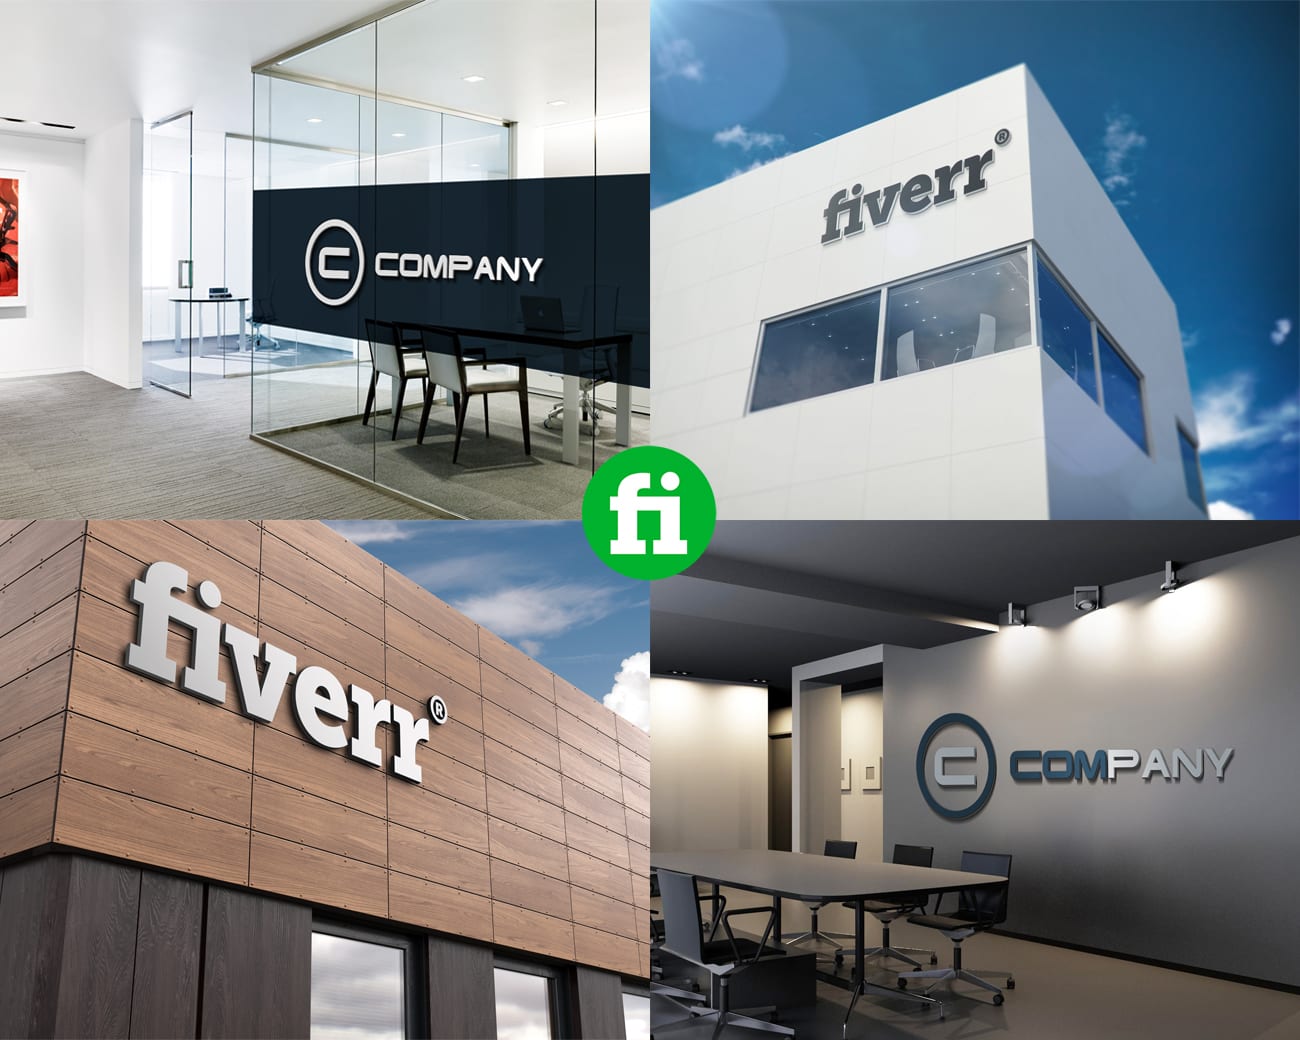 Download Do Realistic Office Interior And Exterior Branding Logo Mockups By Sophie Designs2 Fiverr